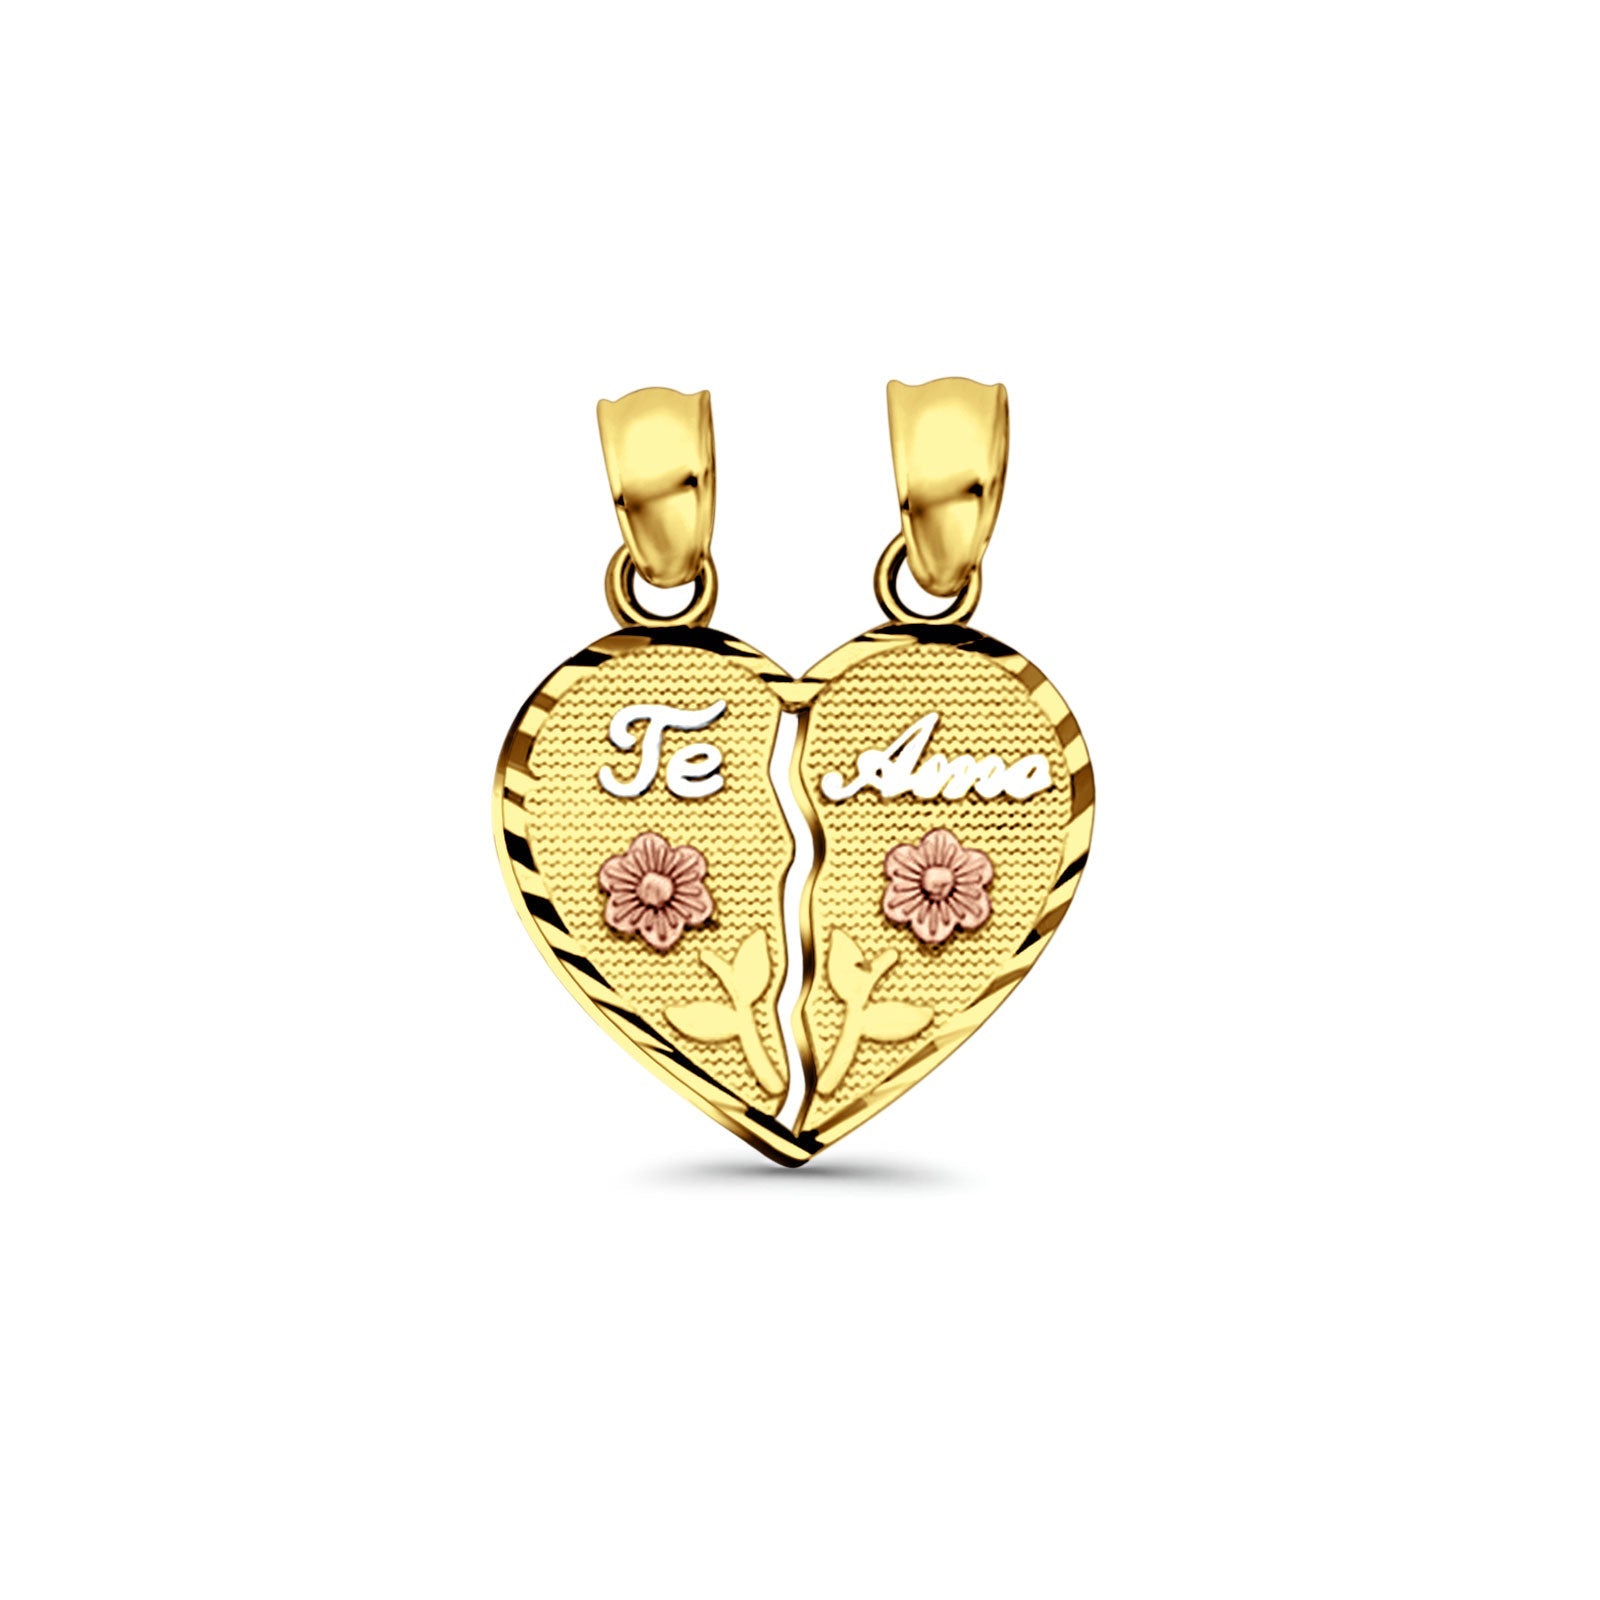 14K Tri Color Gold Te-Amo Pendant 20mmX15mm With 16 Inch To 22 Inch 0.5MM Width Box Chain Necklace